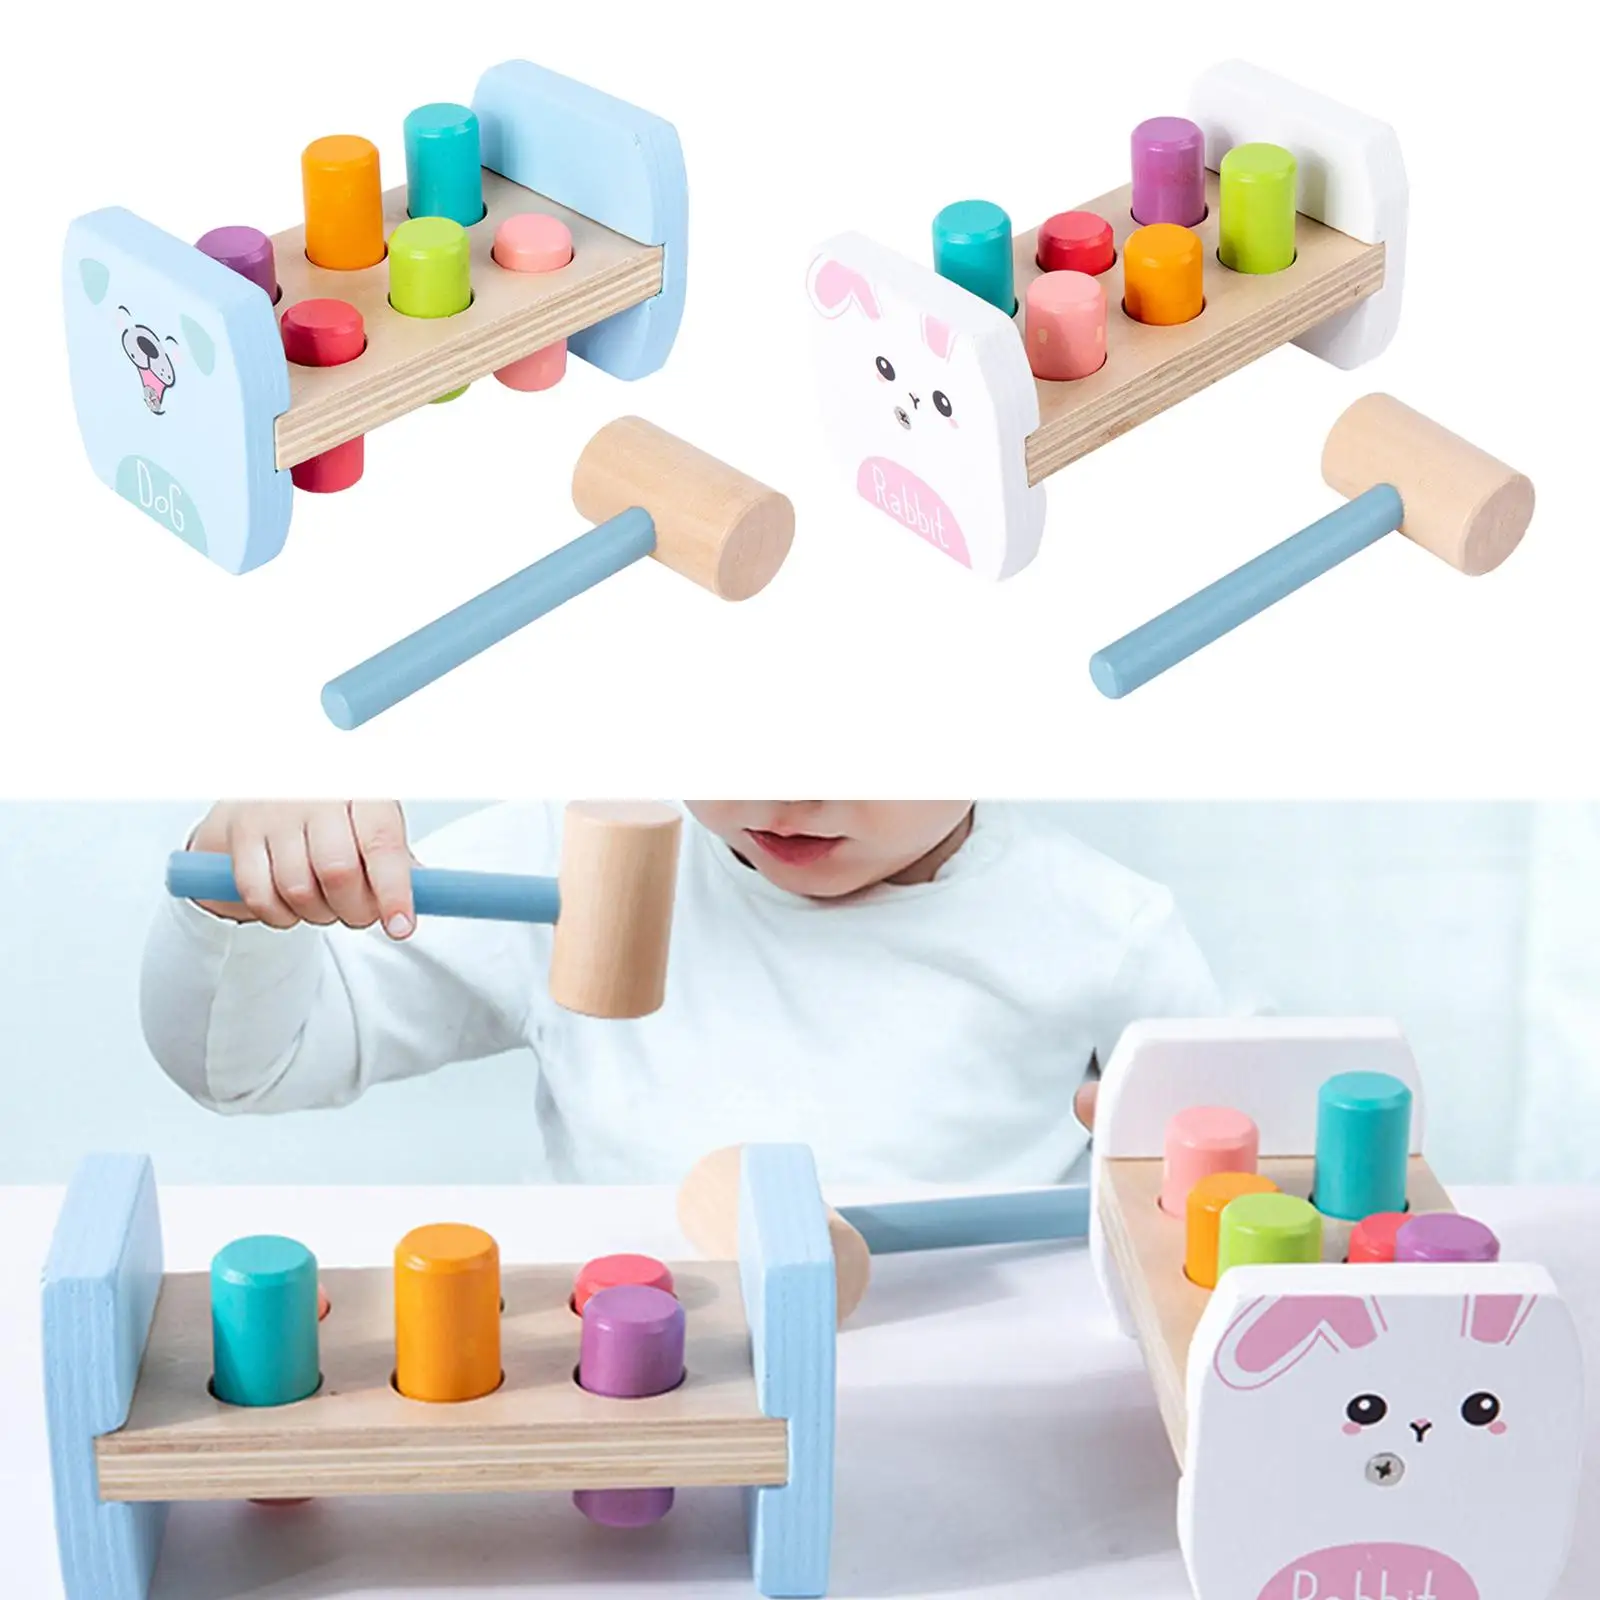 Wooden Pounding Bench Color Cognition Developmental Toy Learning Educational Wooden Hammer Toy for Preschool Boys Girls Toddlers